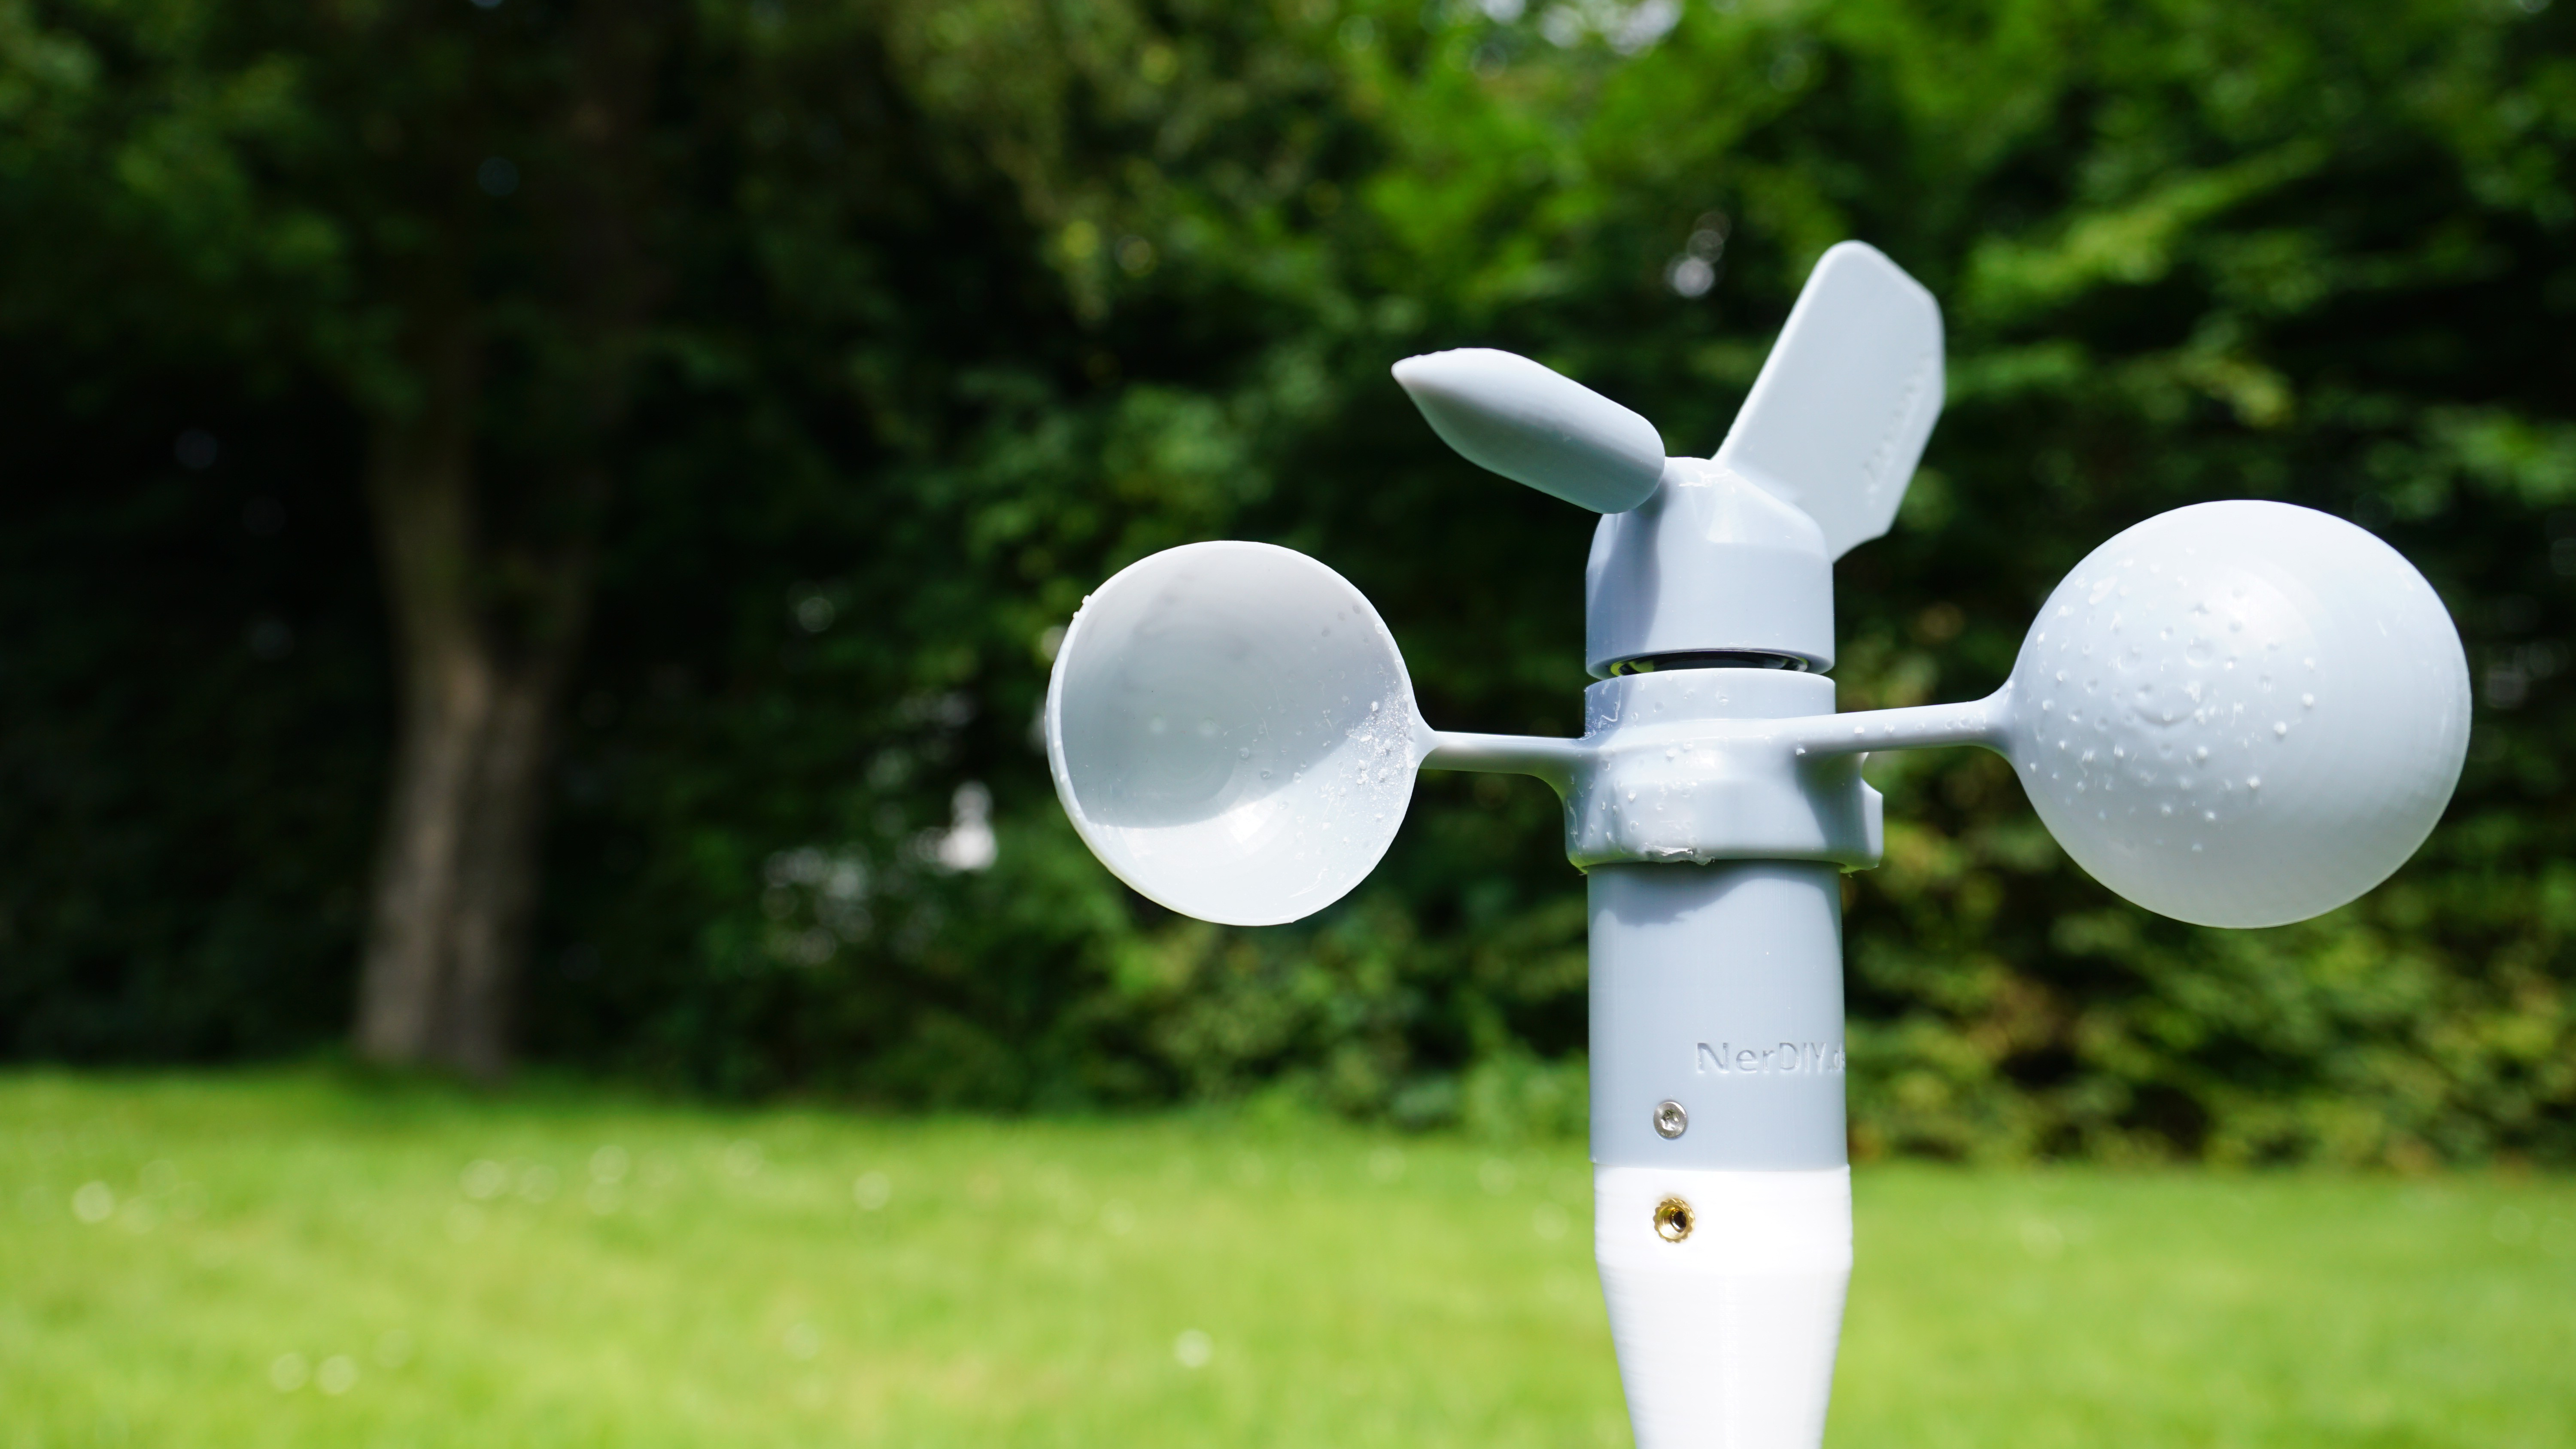 how to make an anemometer for a science project